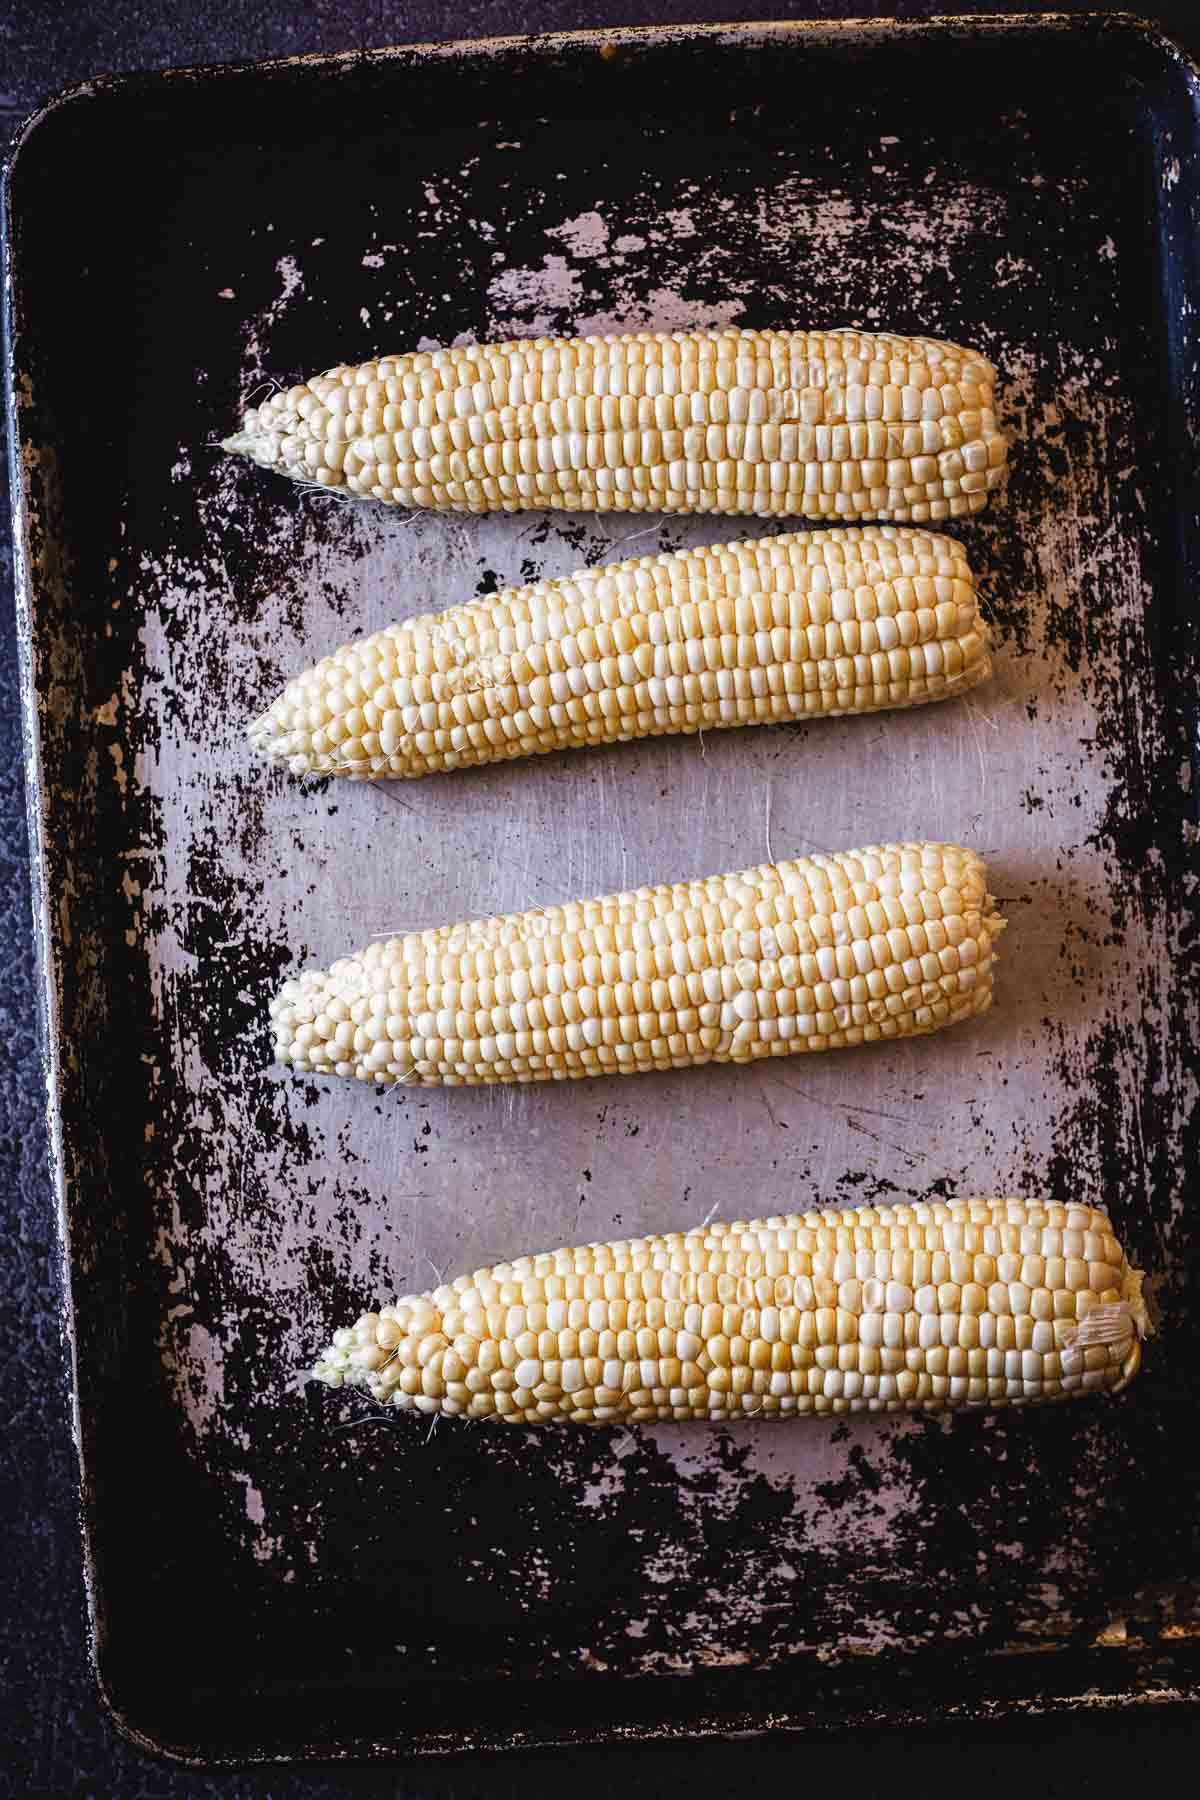 Corn on the cob on a baking sheet.